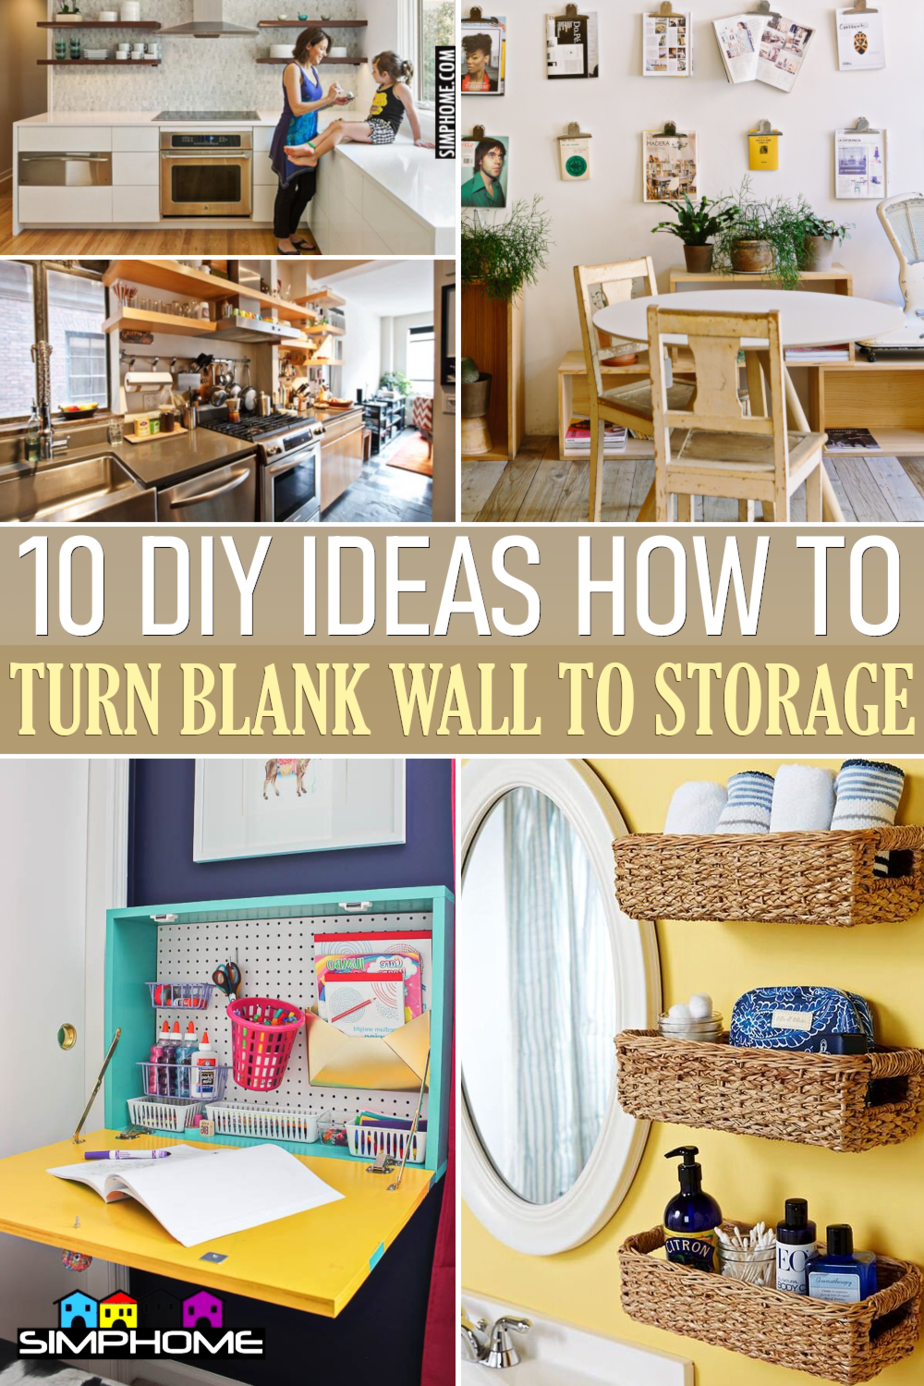 10 DIY Ideas How to Turn Blank Wall into Storage Space via SimphomecomFeatured